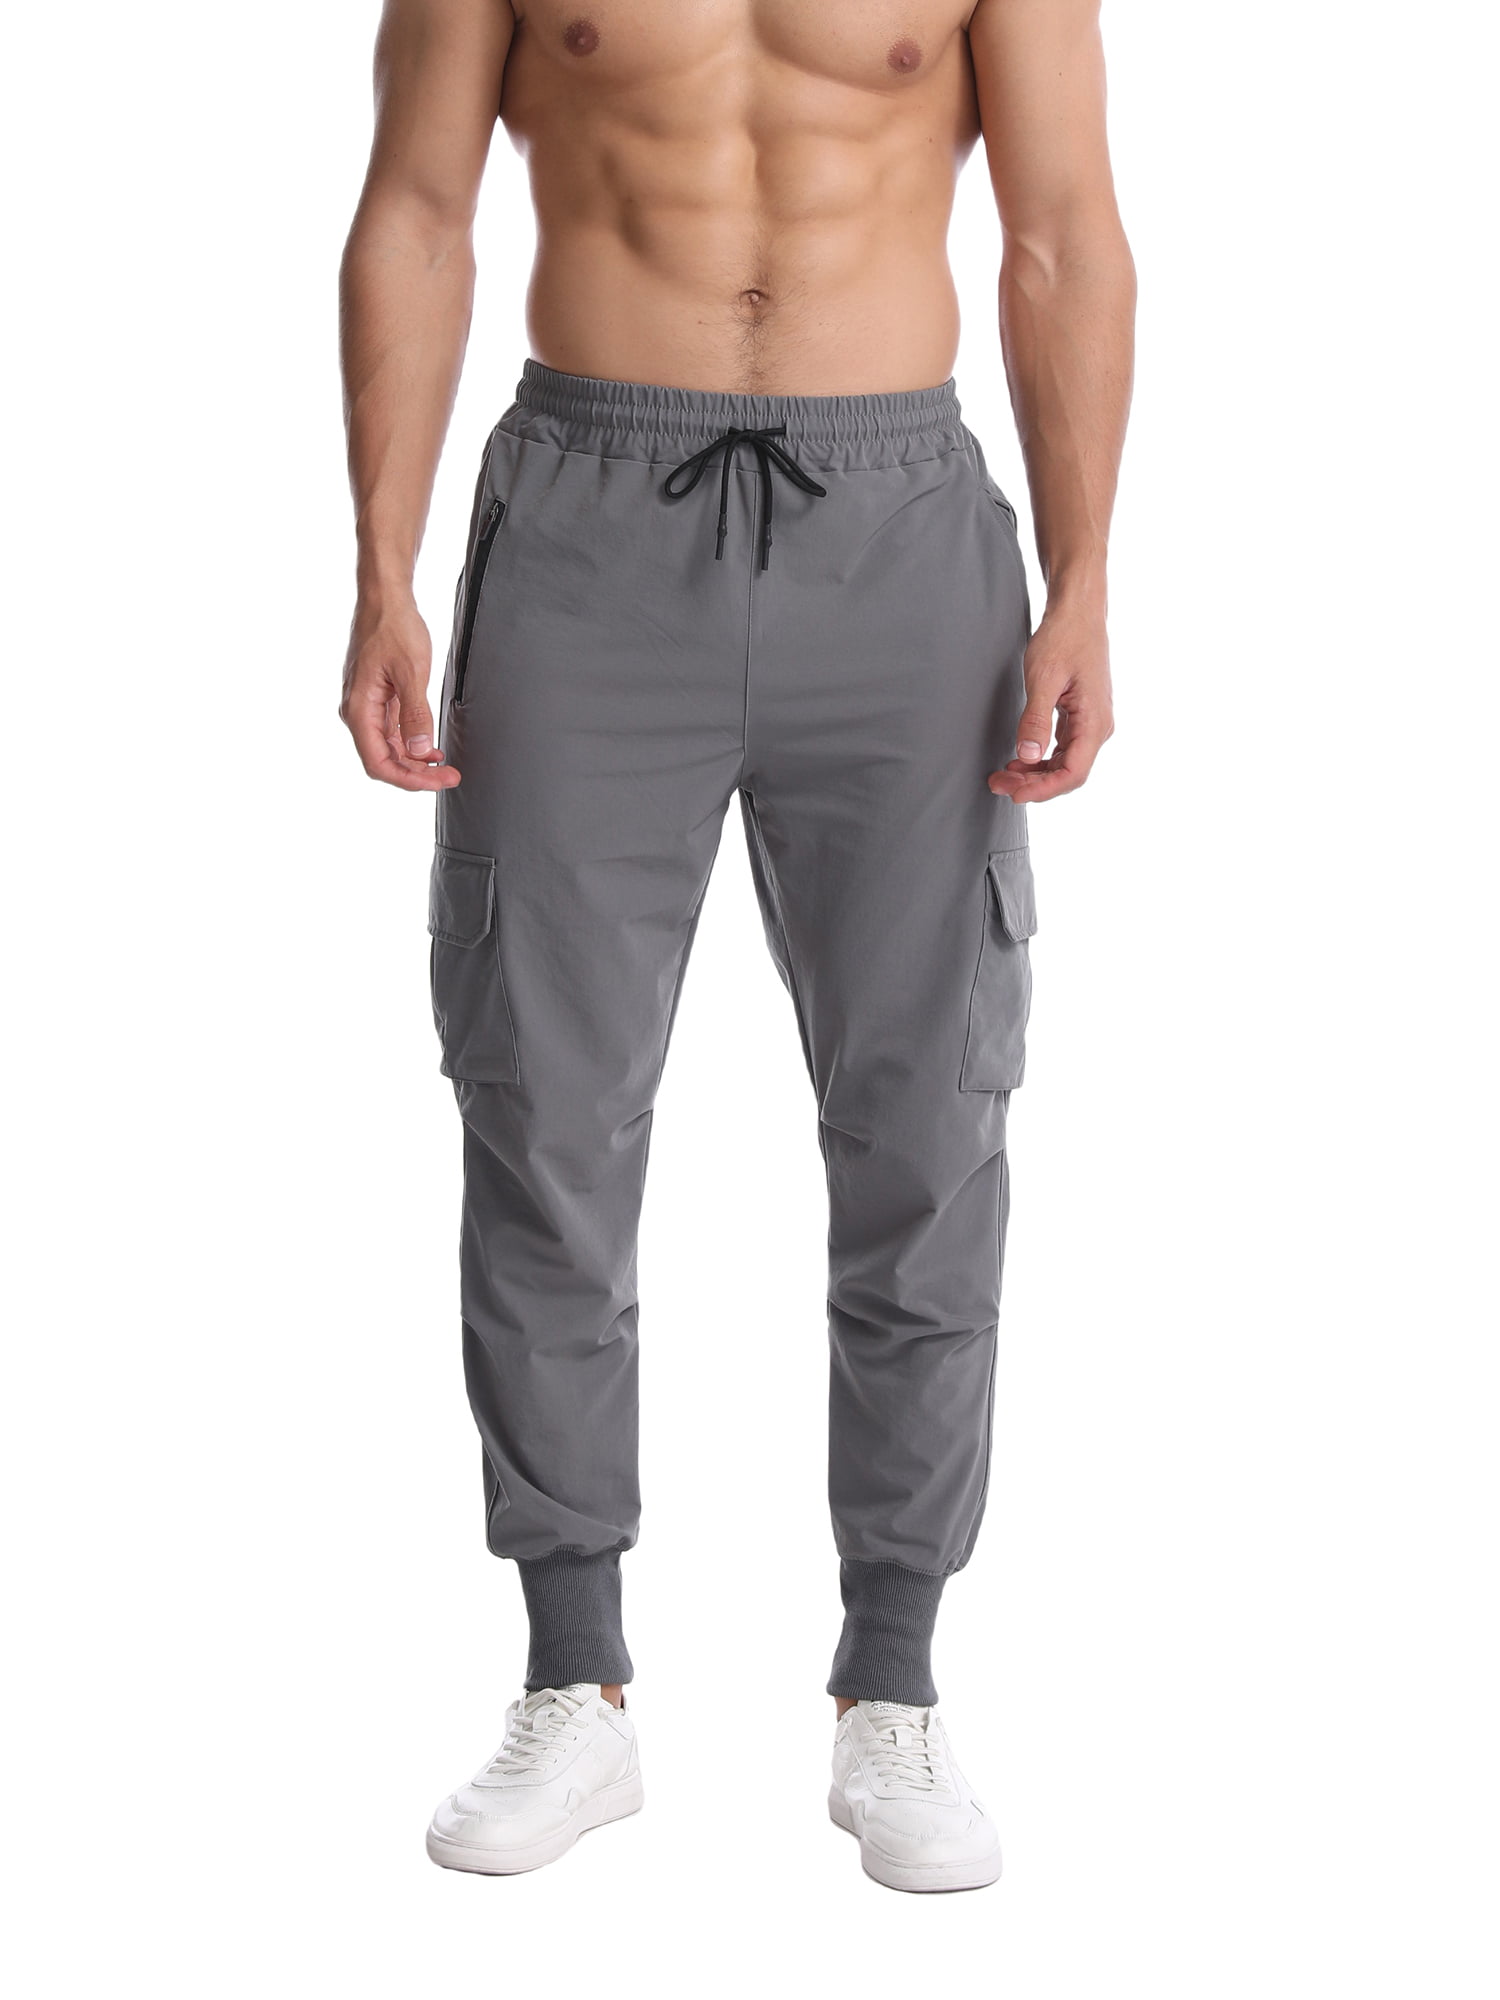 Reebok Mens Legacy Pants Trousers Bottoms Grey Sports Gym Breathable Lightweight 